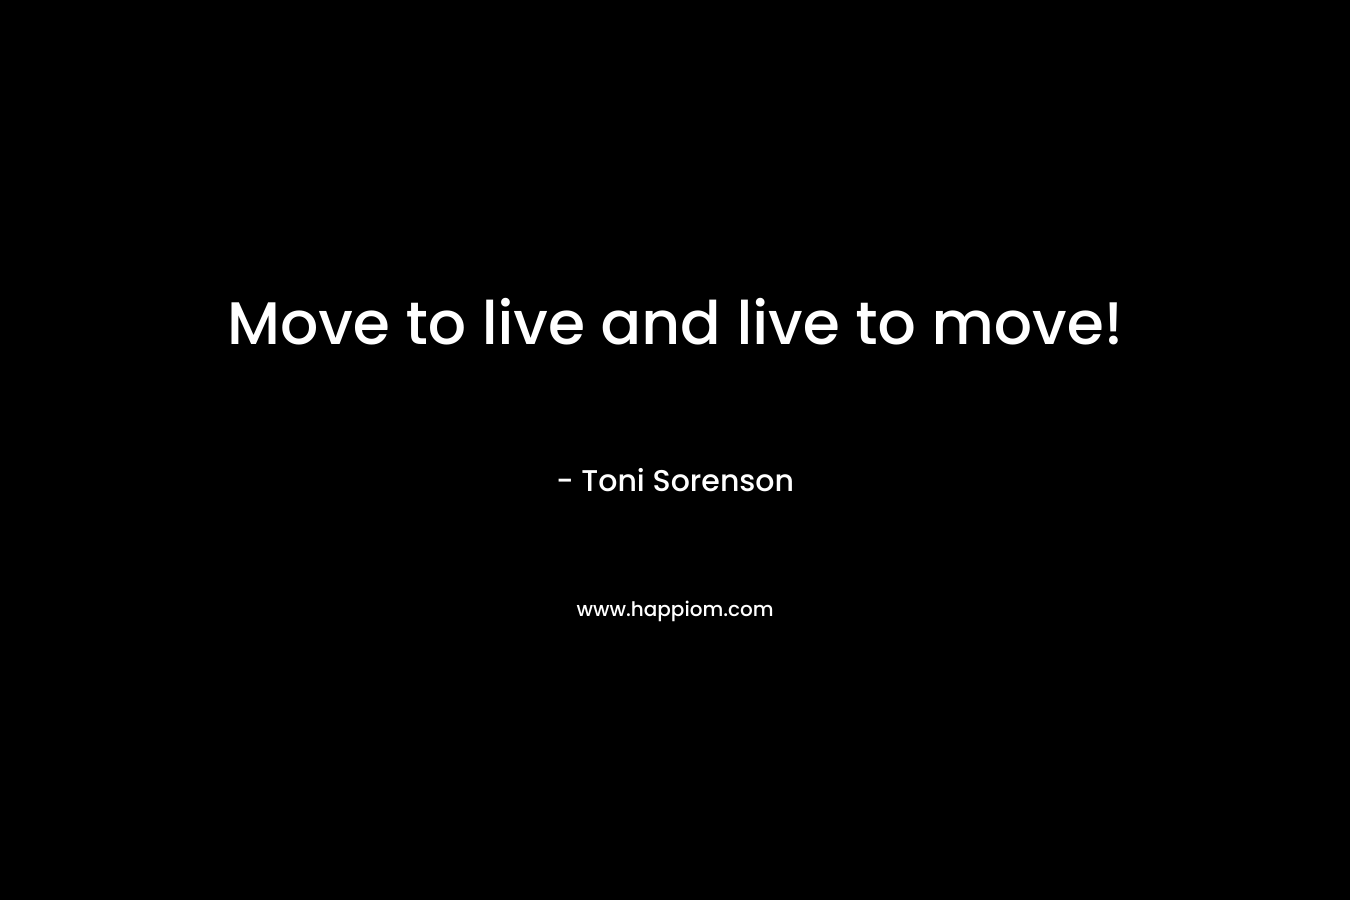 Move to live and live to move!